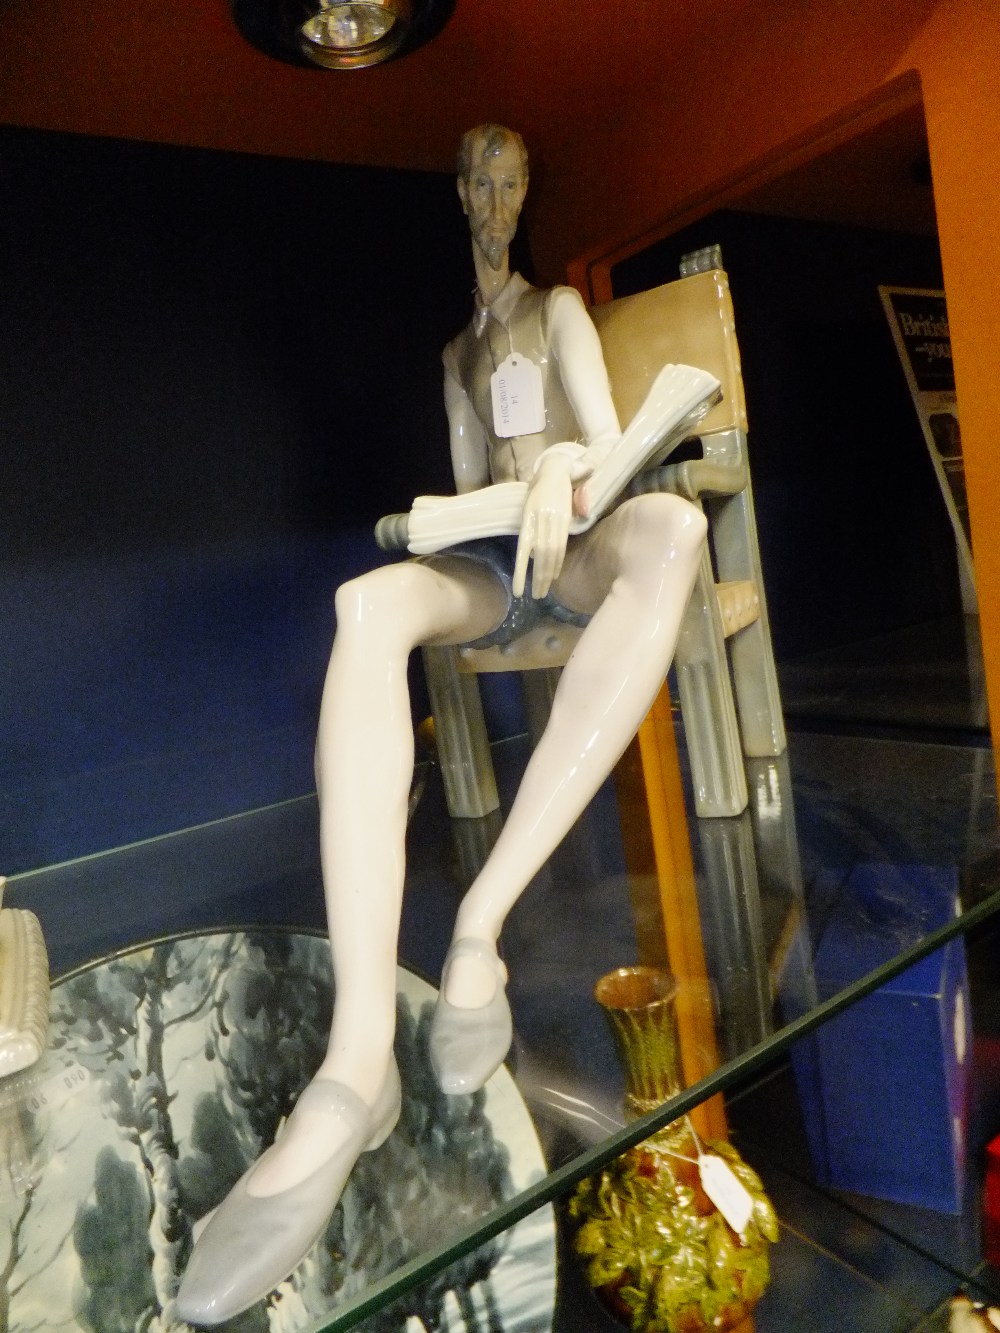 A Lladro figure of "Don Quixote" sitting in a chair reading his book whilst holding his sword in his